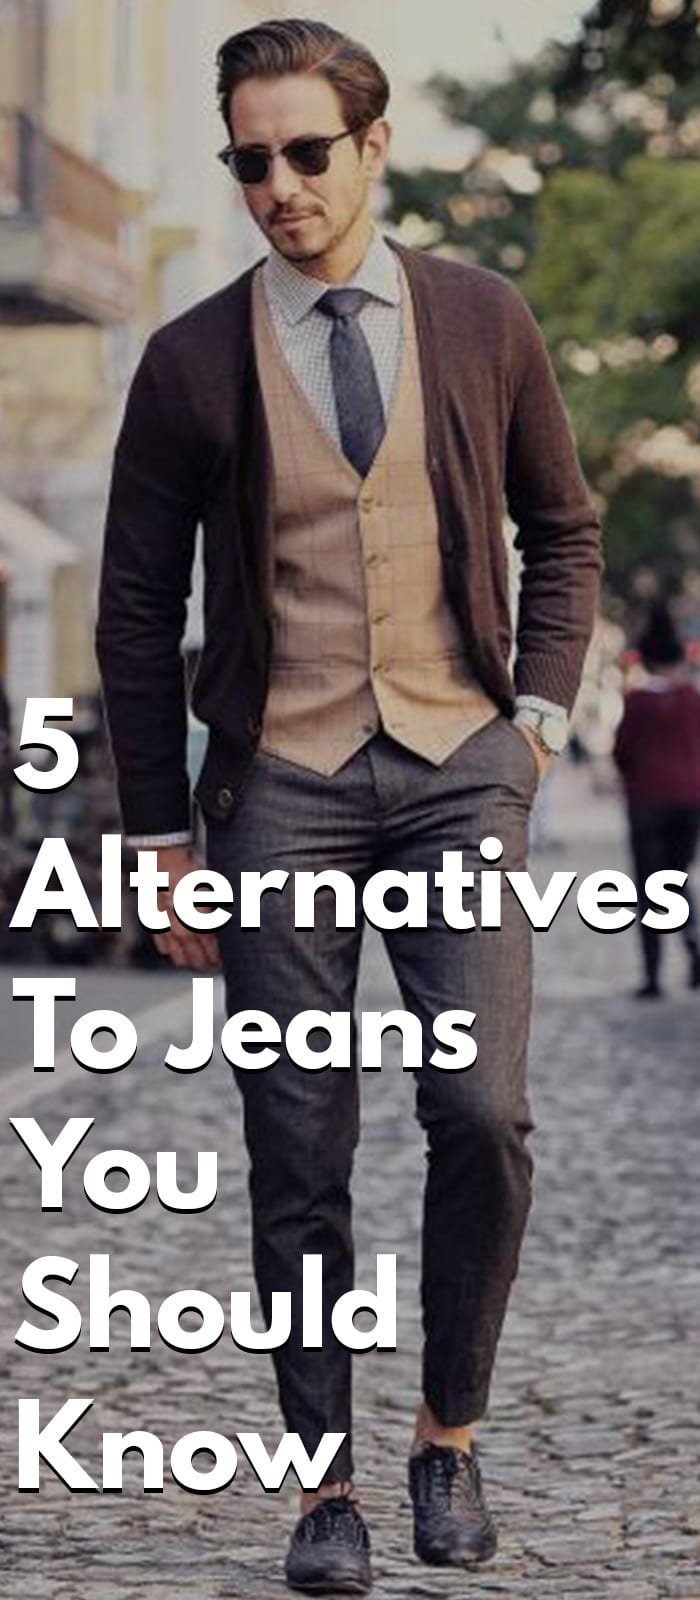 5 Alternatives To Jeans You Should Know